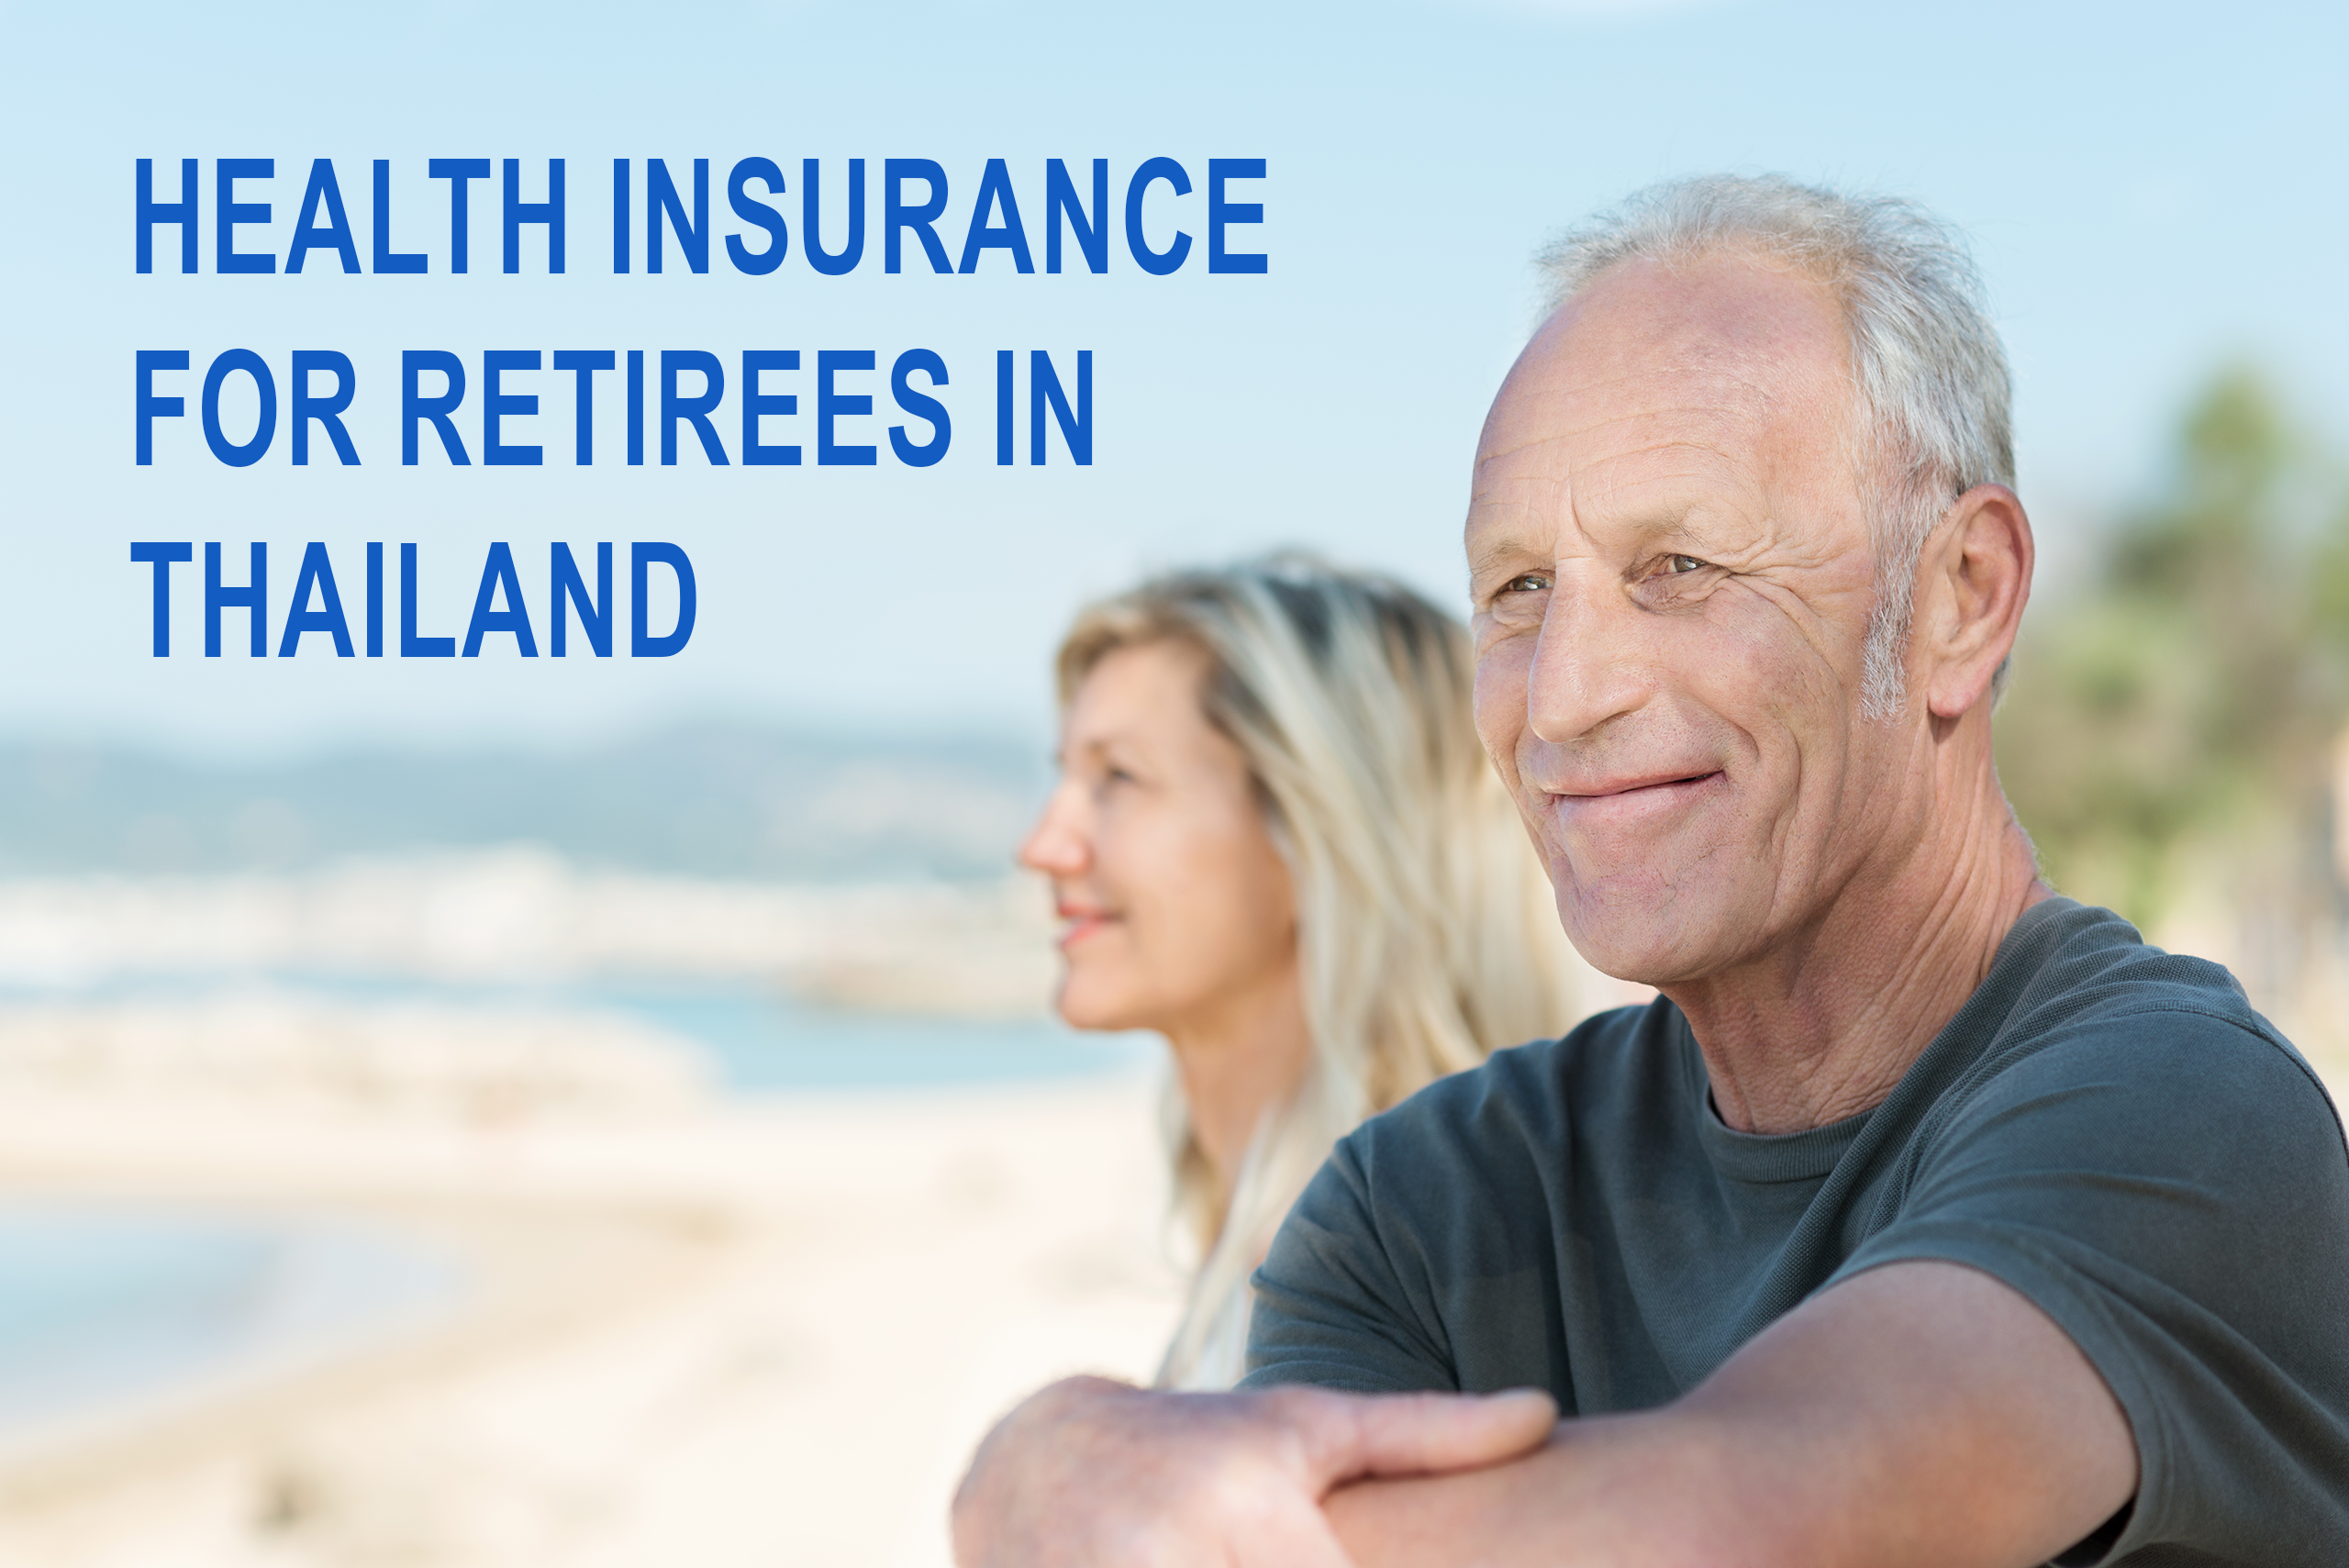 Health insurance for retirees in Thailand